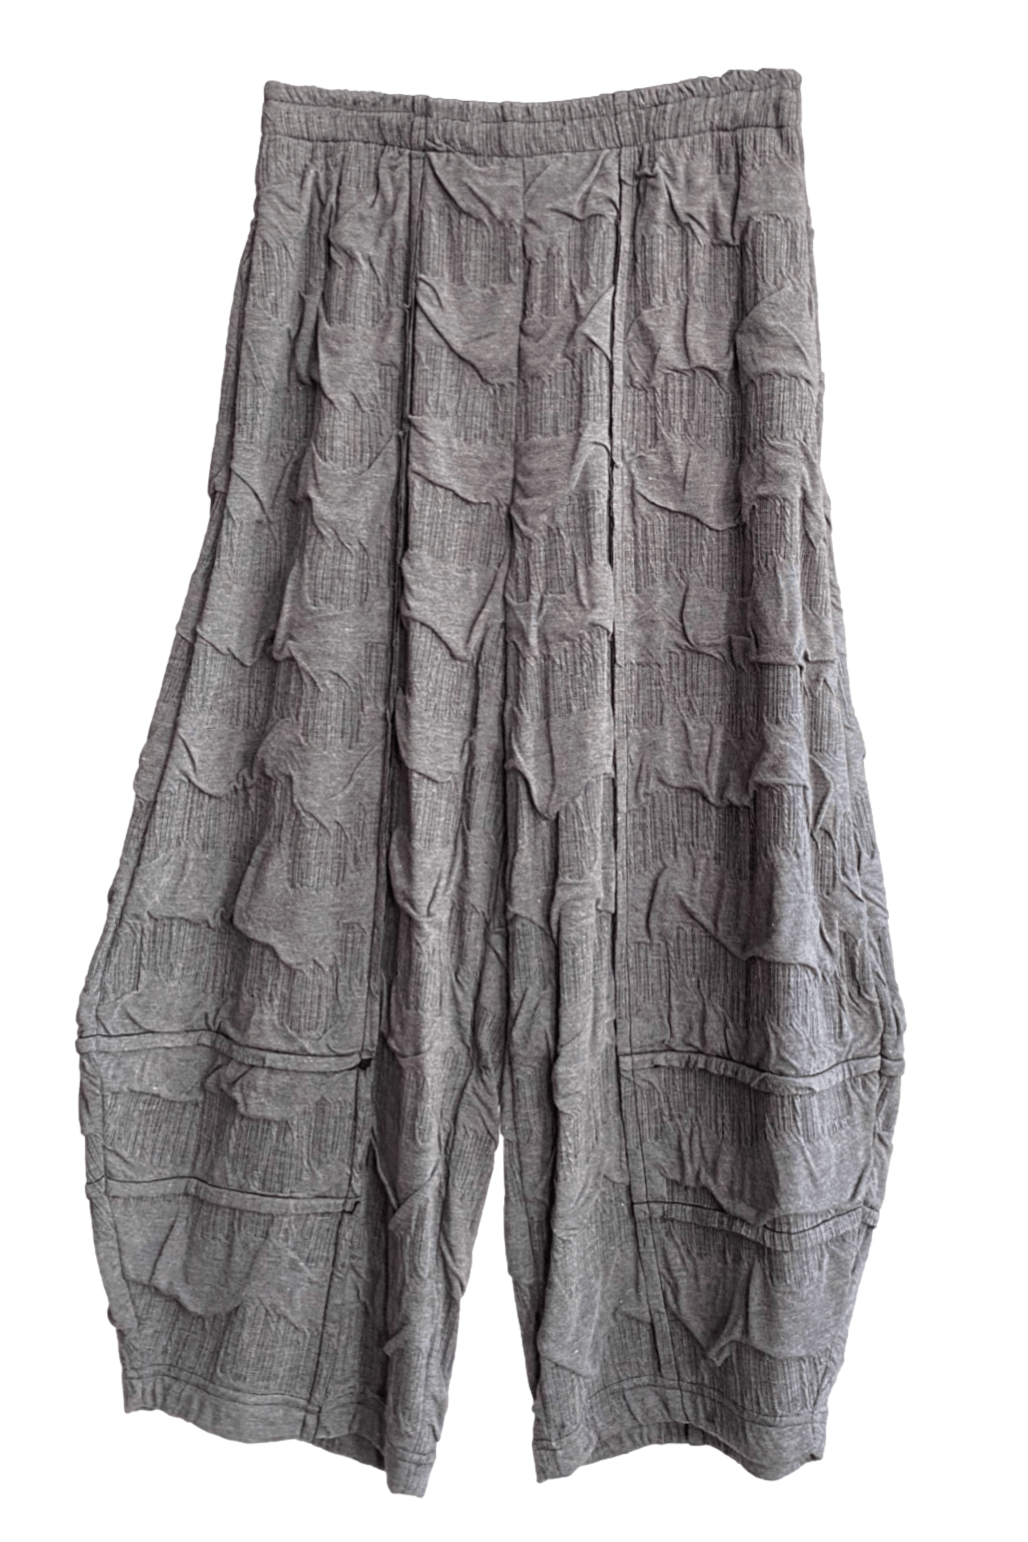 Full cut funky pant in a grey color with textured fabric. They are wide cut and have 2 seamed side pockets.